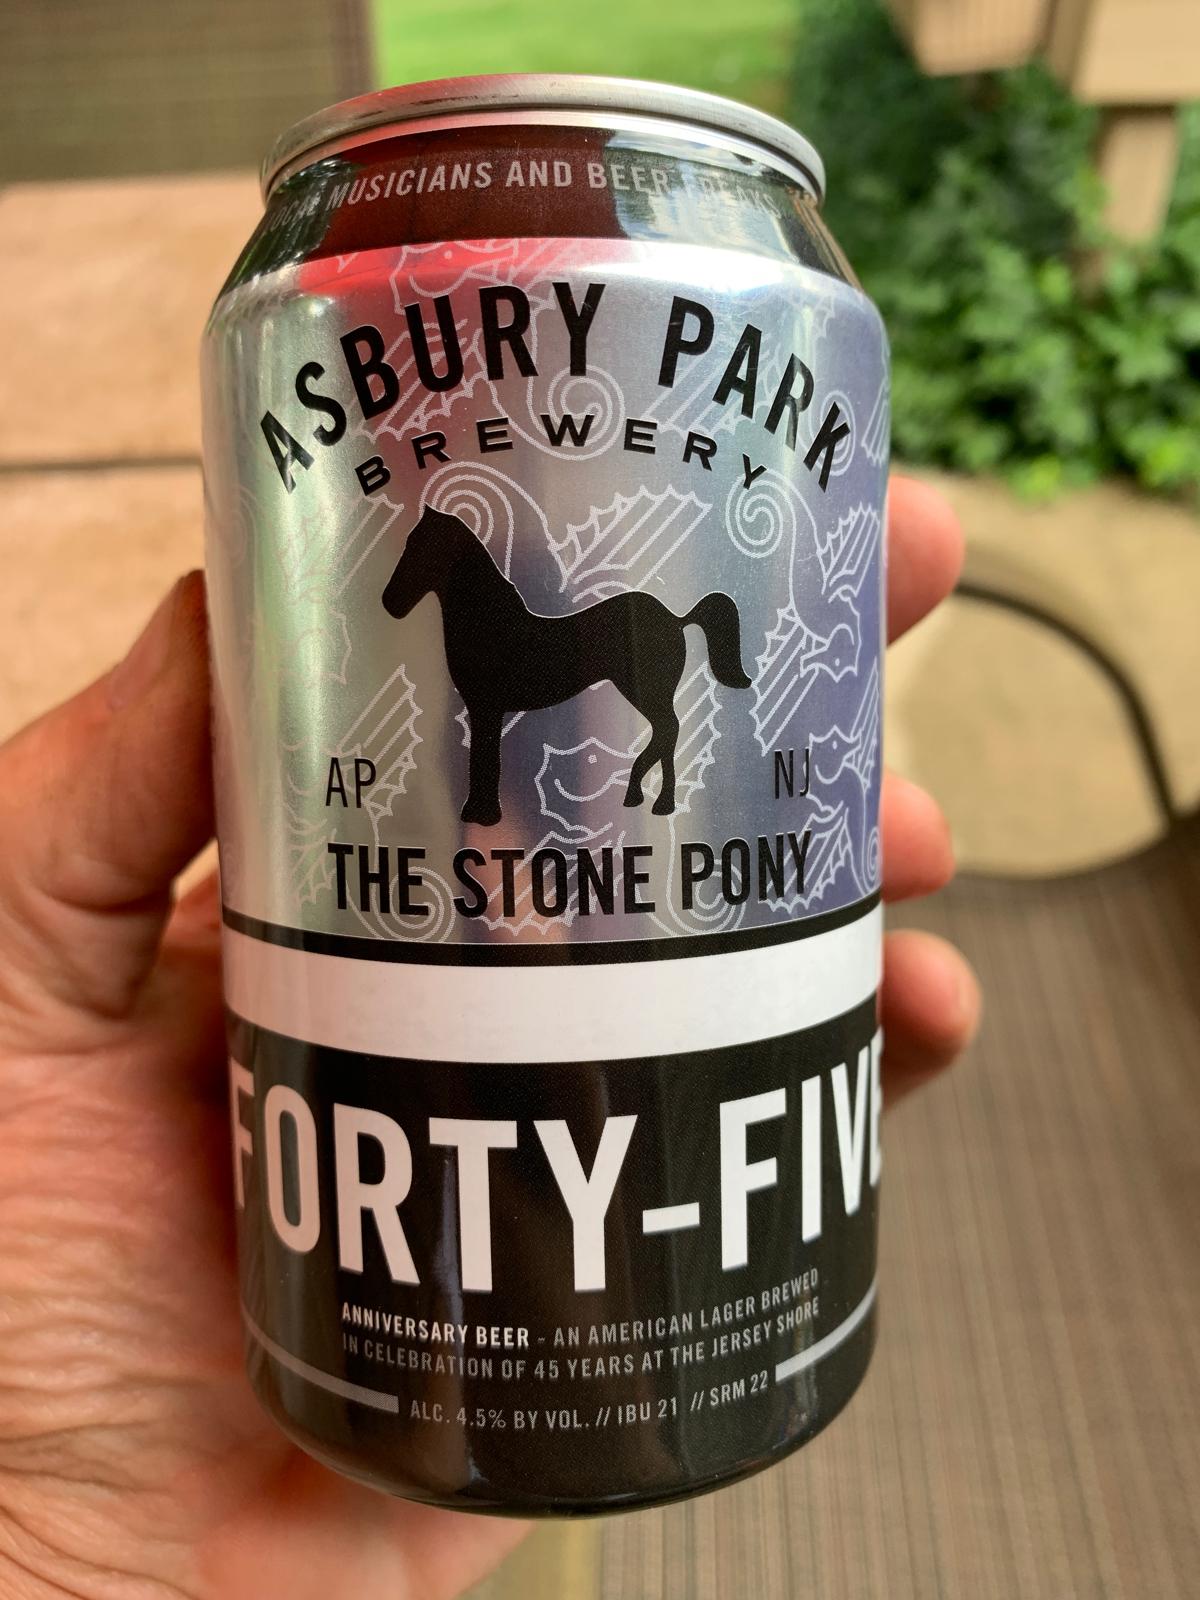 The Stone Pony Forty-Five